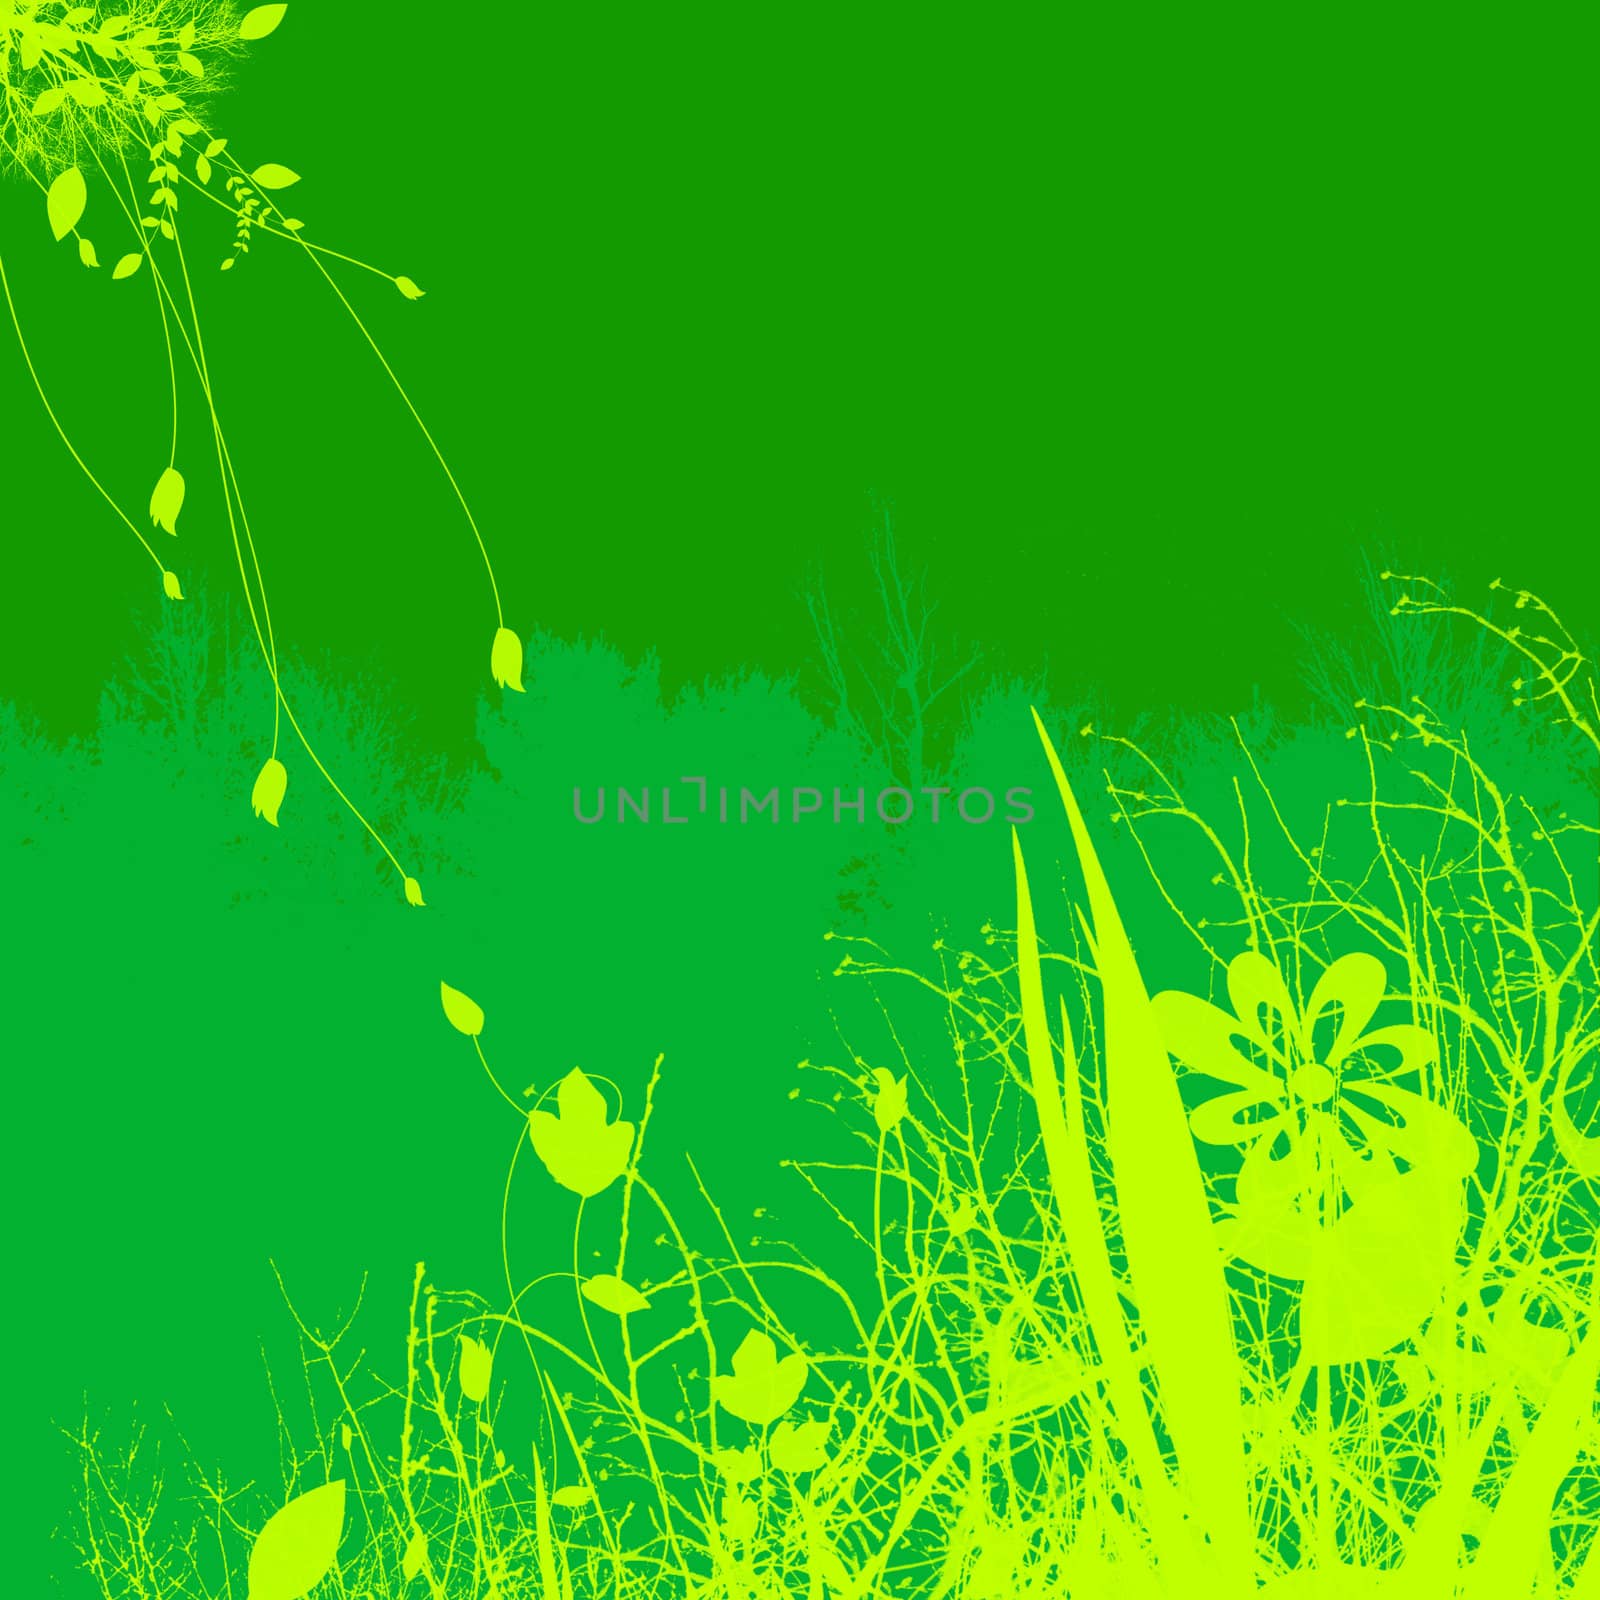 Green Plant and Flower Illustration Design With Contrasting Background